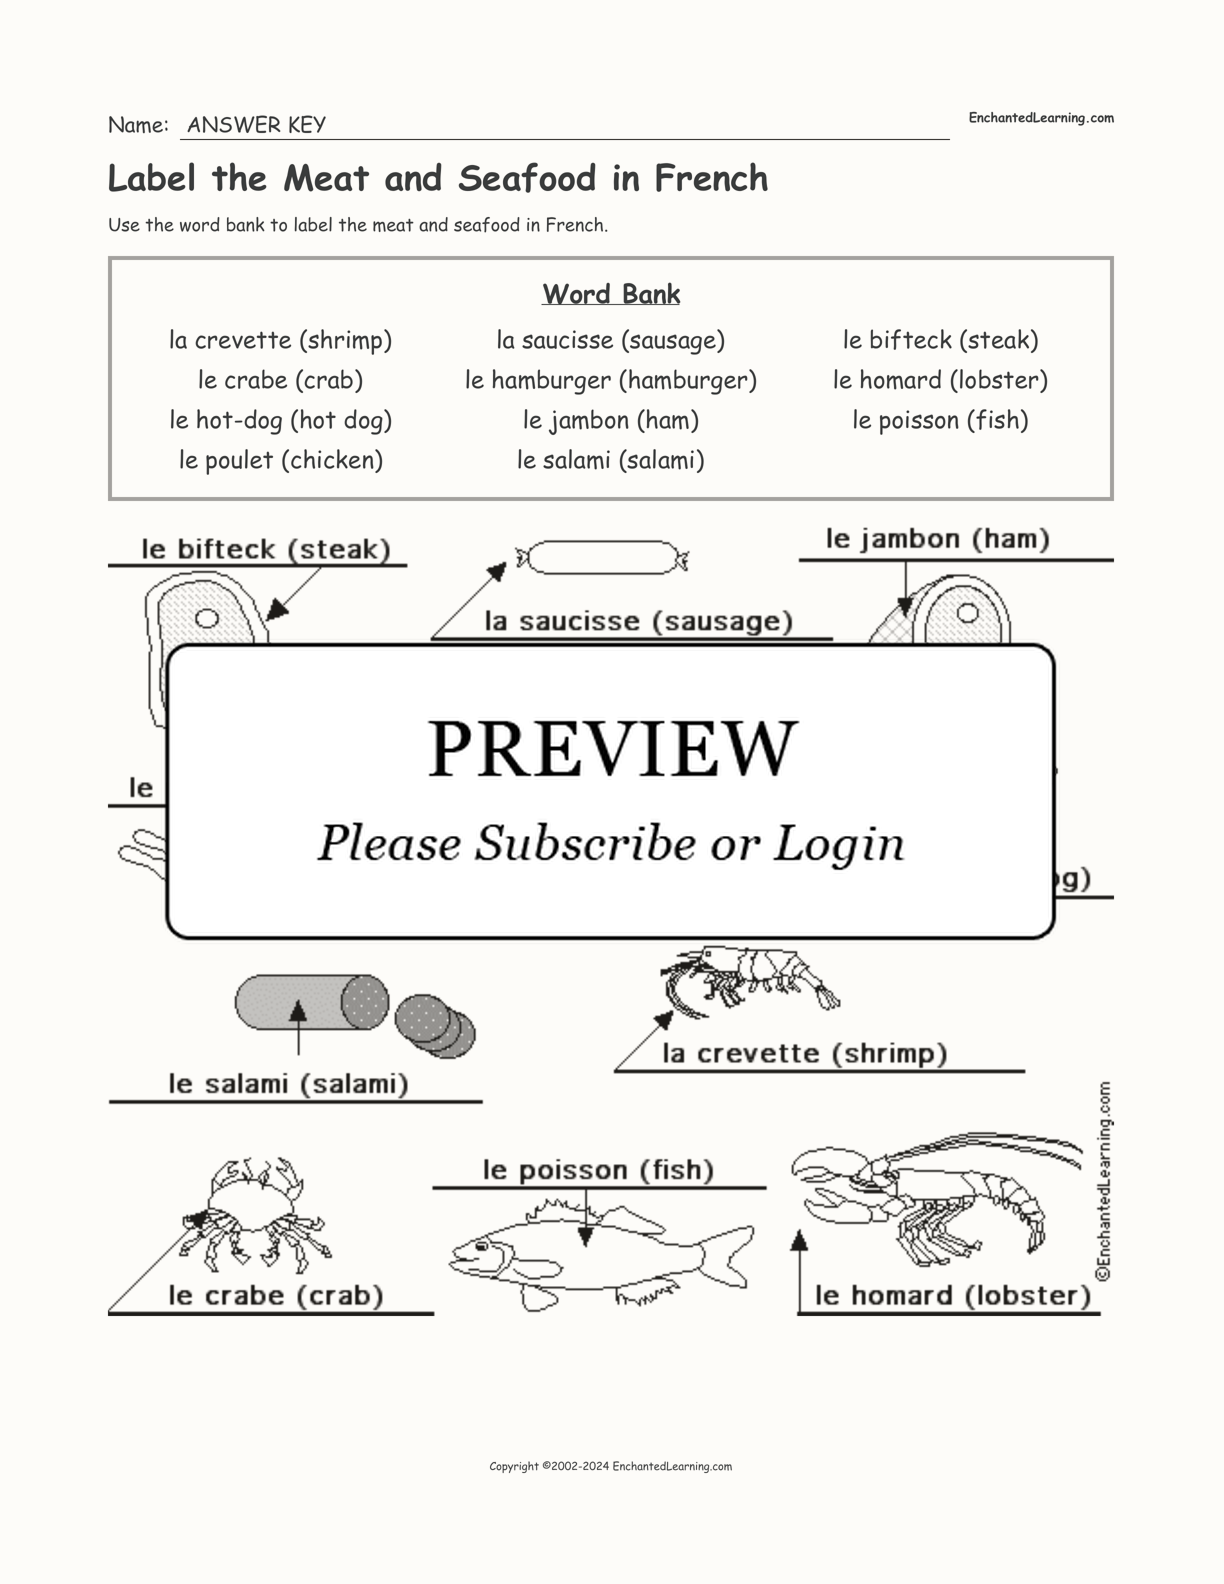 Label the Meat and Seafood in French interactive worksheet page 2